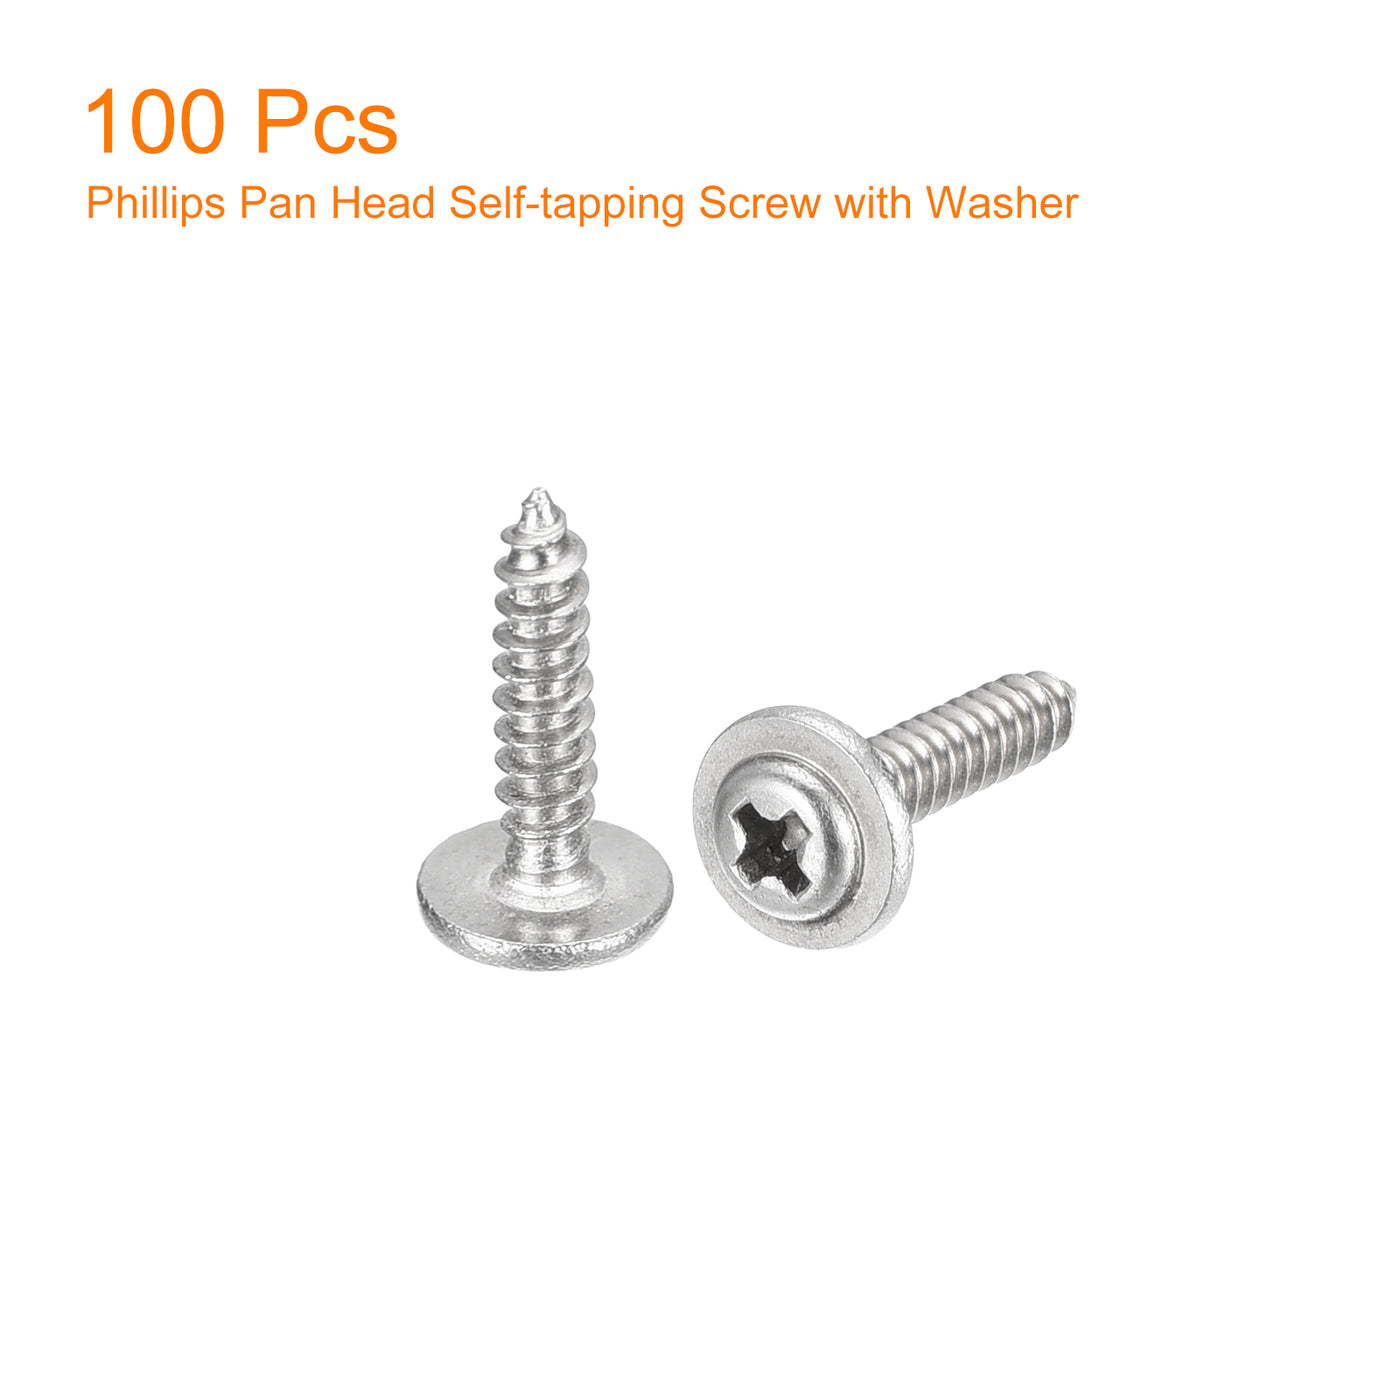 uxcell Uxcell ST2.6x10mm Phillips Pan Head Self-tapping Screw with Washer, 100pcs - 304 Stainless Steel Wood Screw Full Thread (Silver)